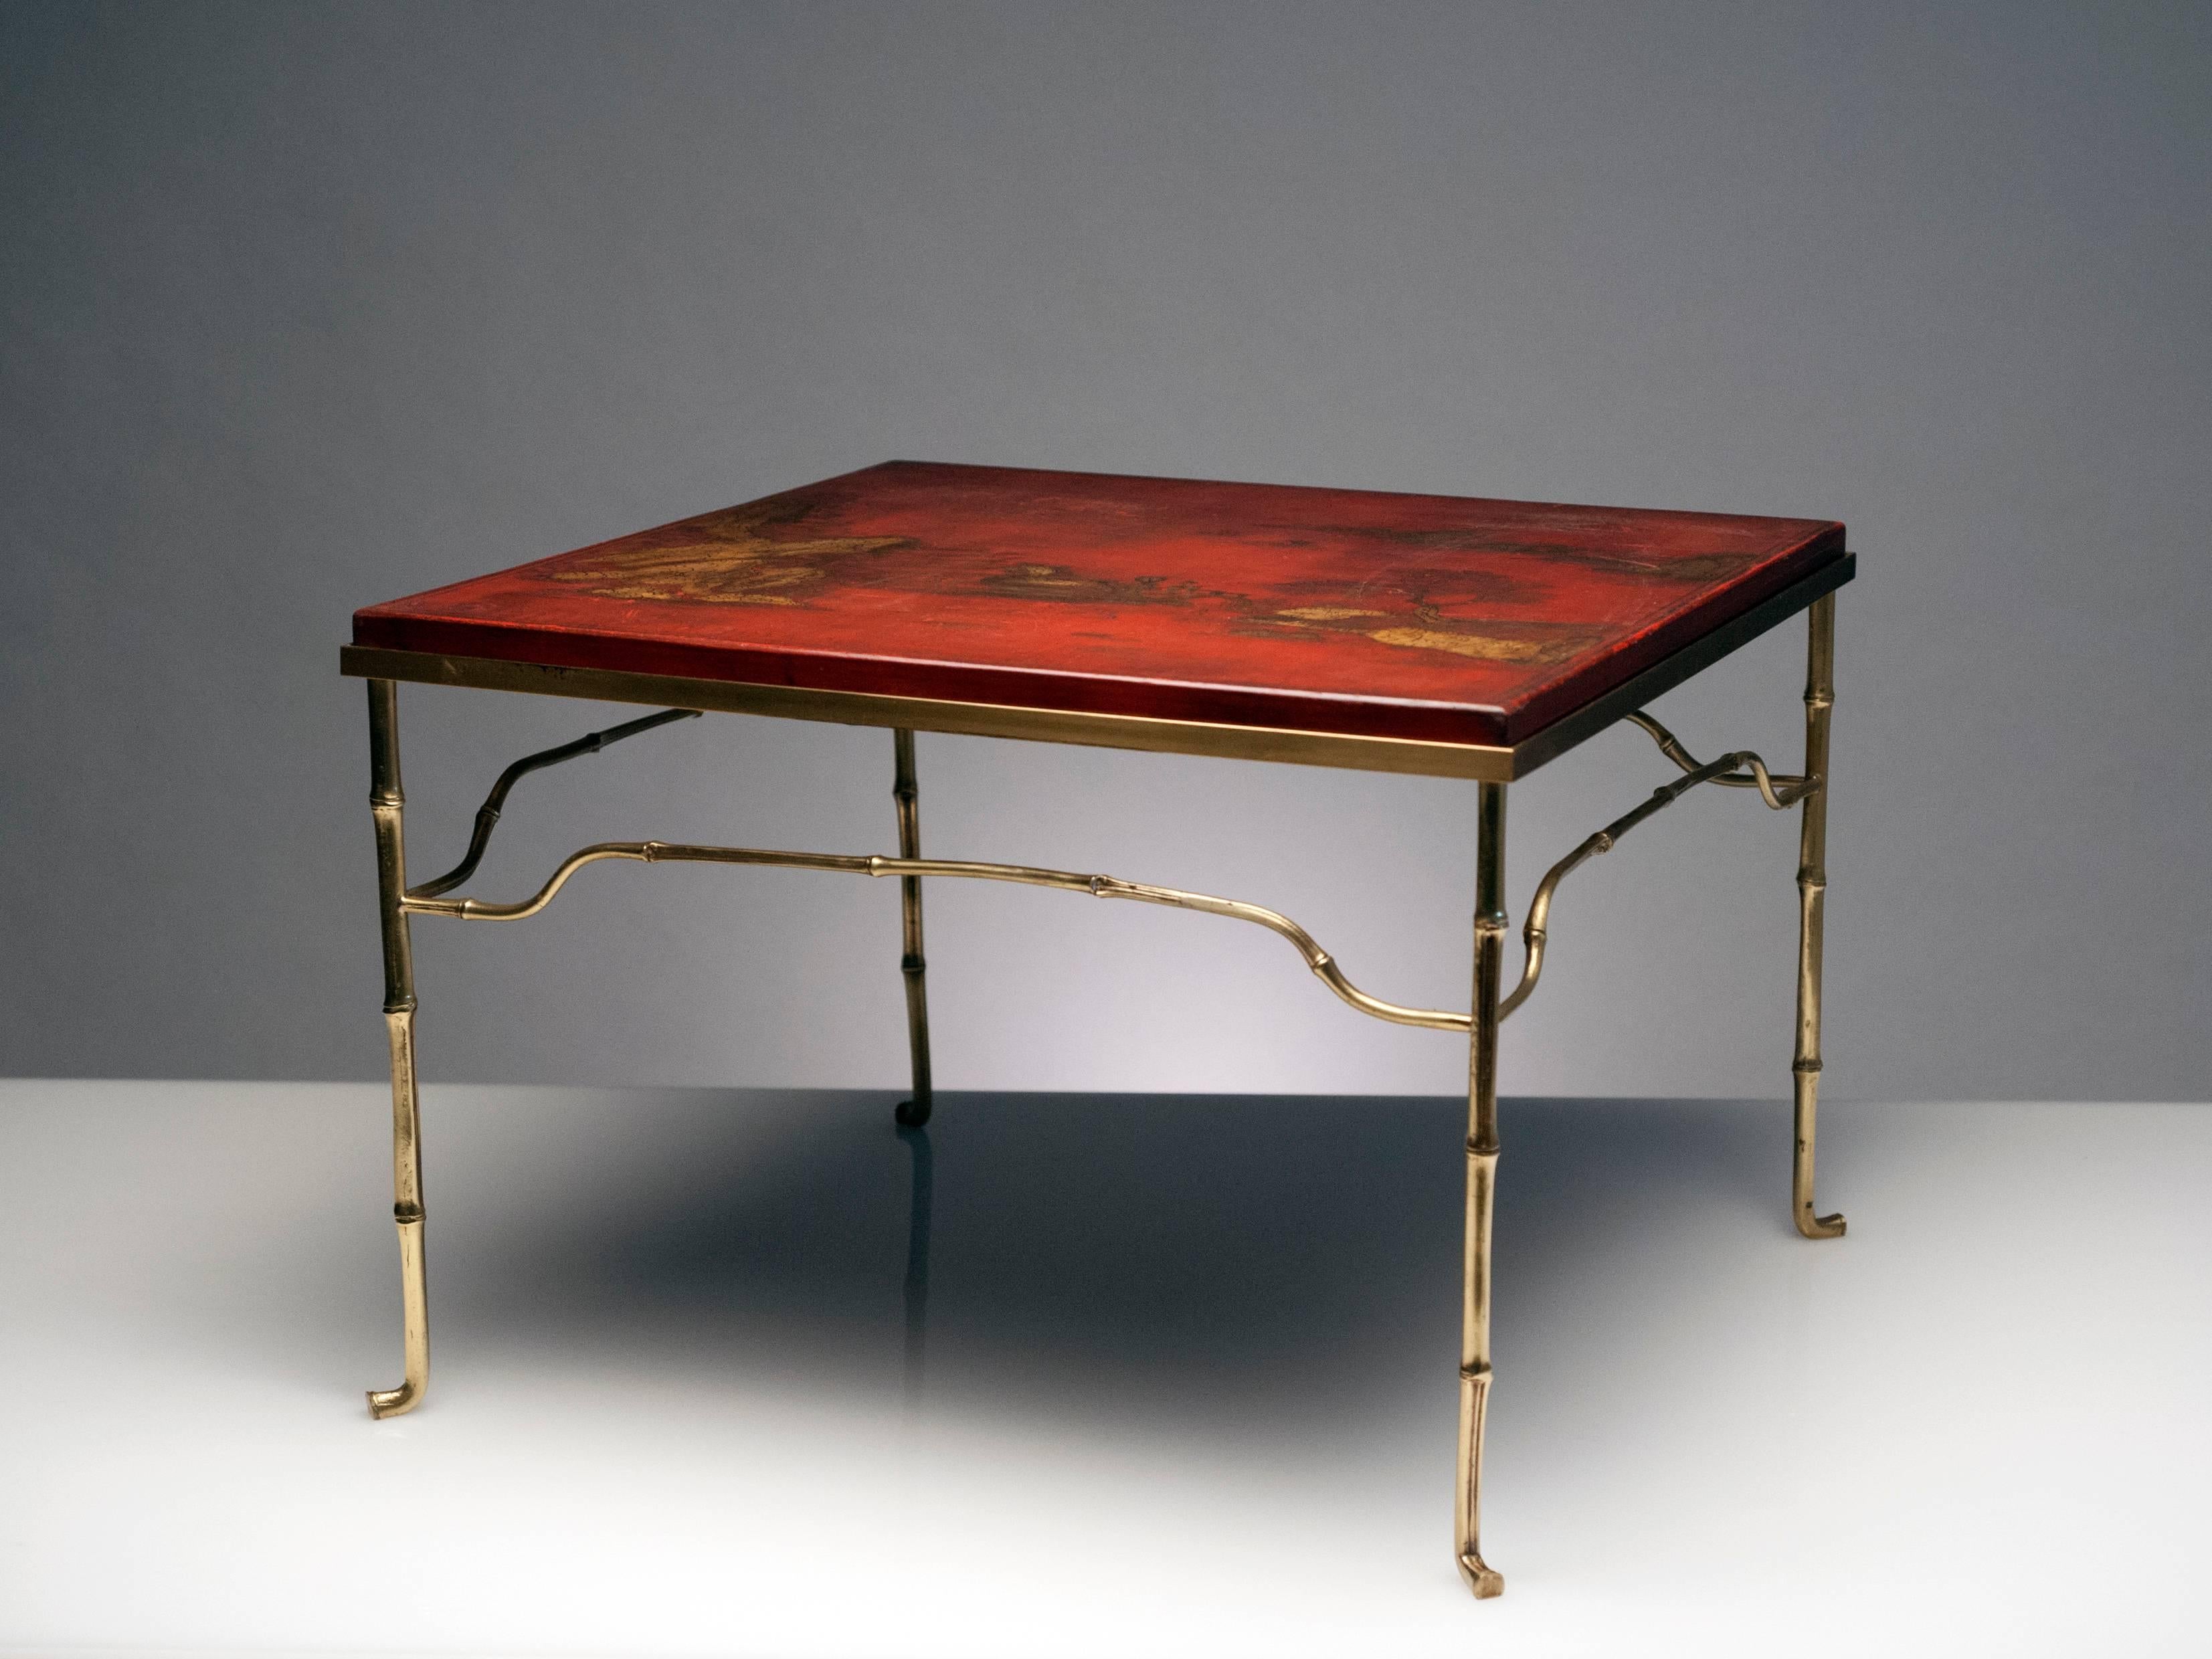 Unique and appealing French brass table with Asian antique top. Base is solid brass and top is antique red lacquered wood with Asian landscape. Handwritten Asian characters to underside.